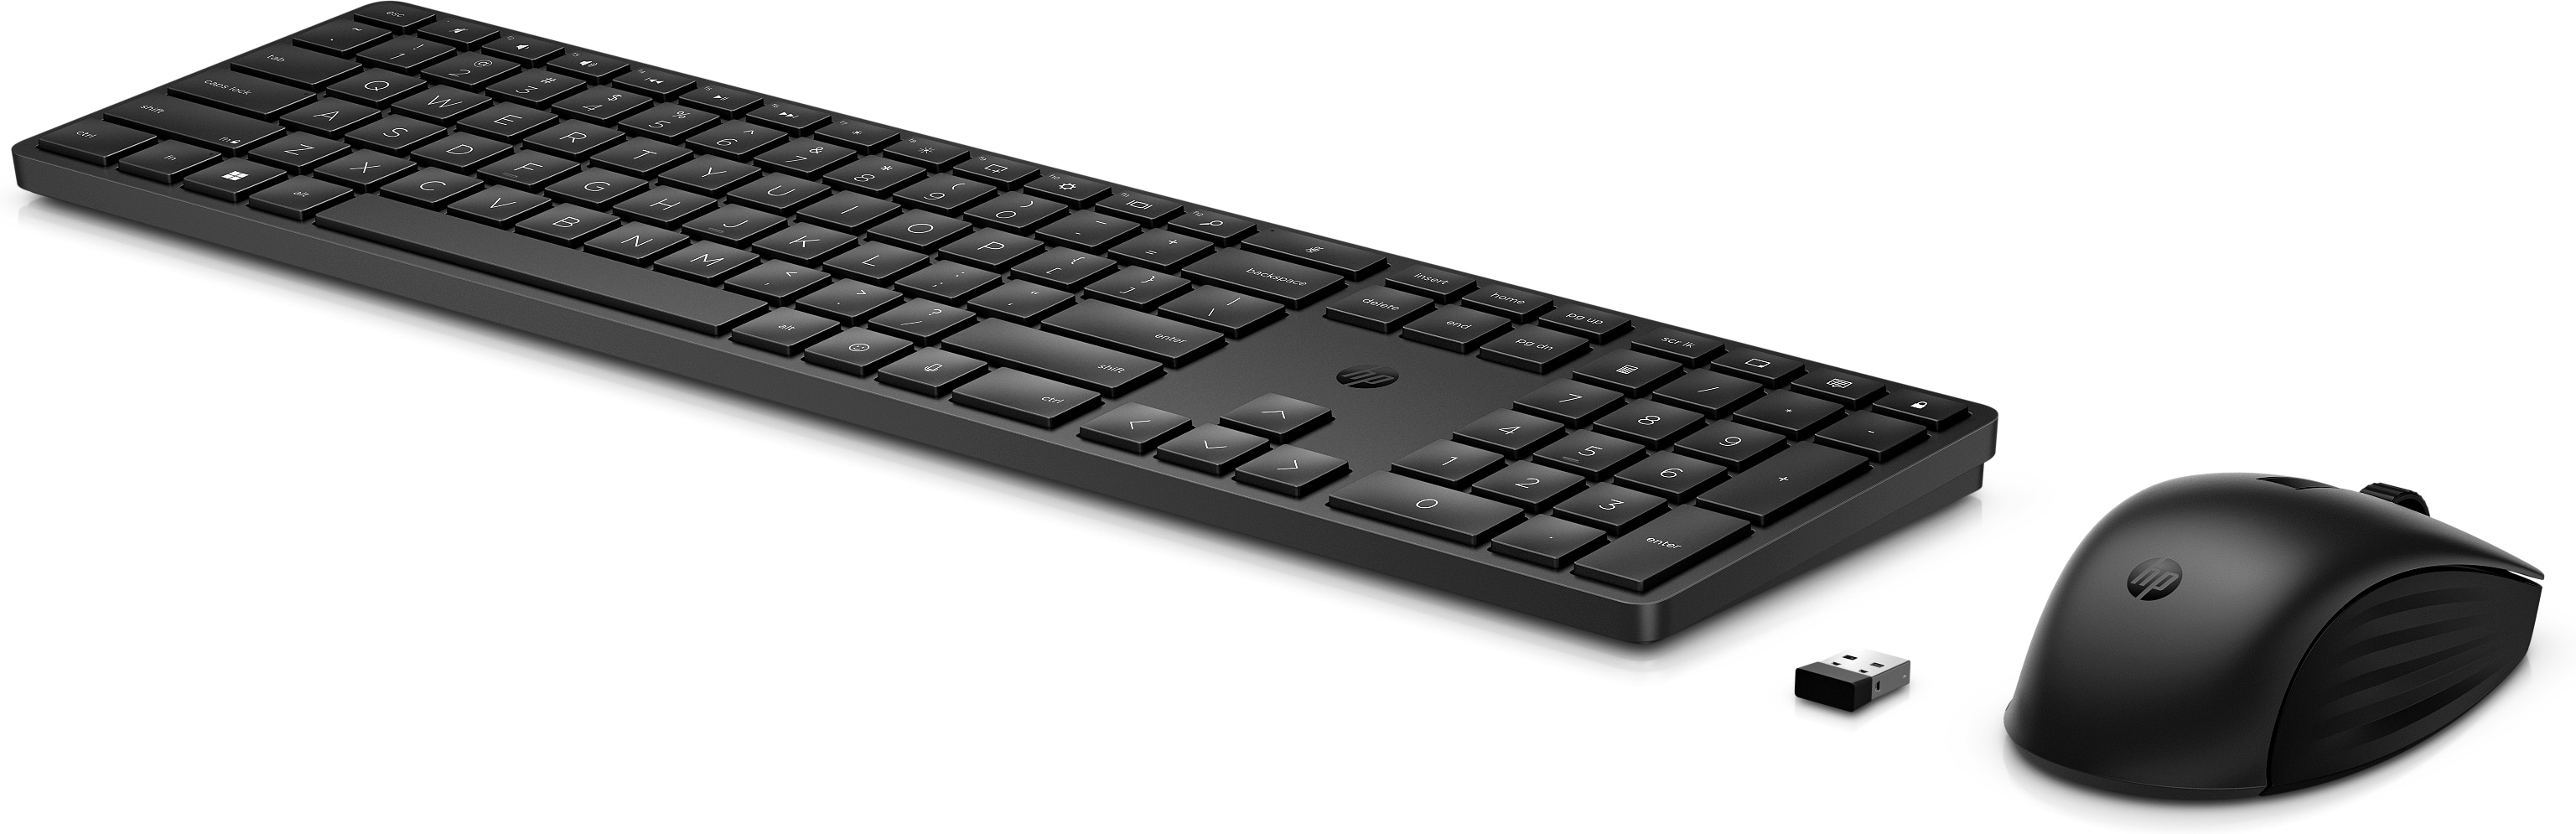 HP 655 Wireless and Mouse Keyboard Combo